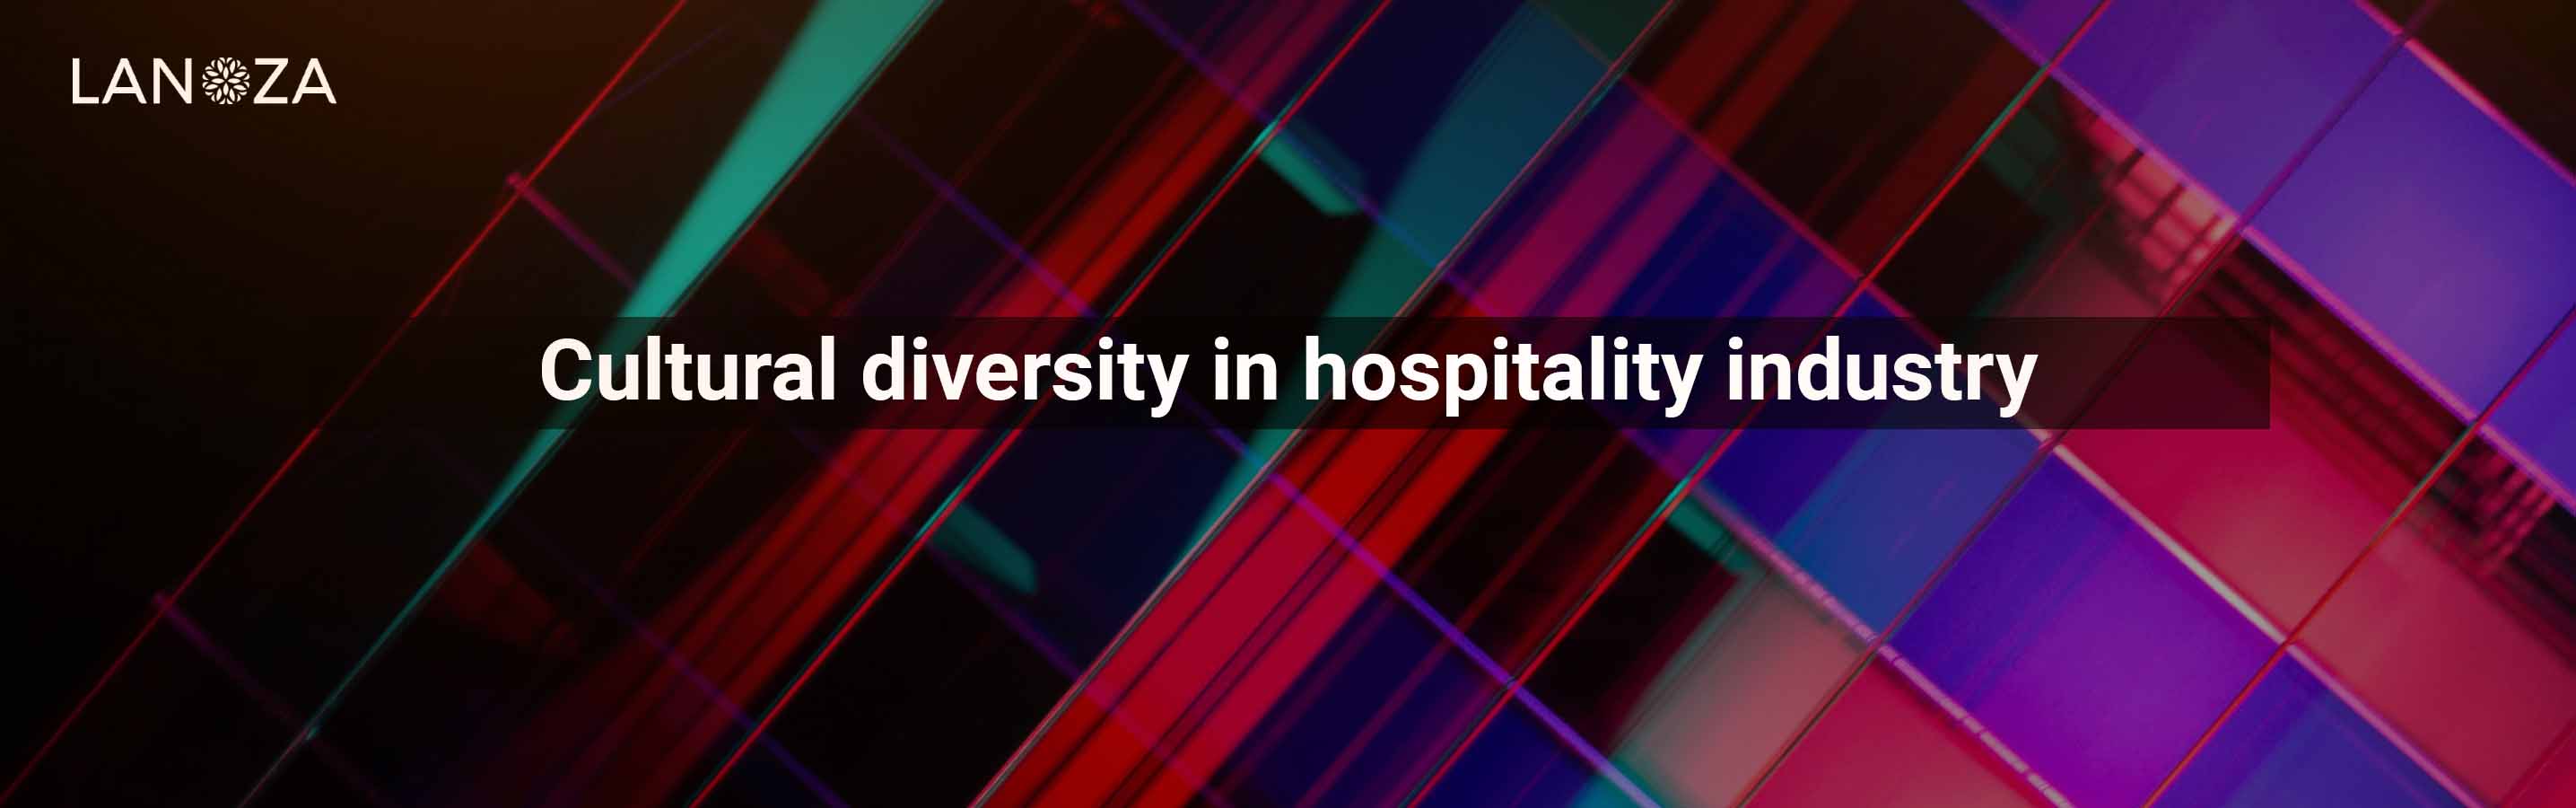 cultural-diversity-in-hospitality-industry